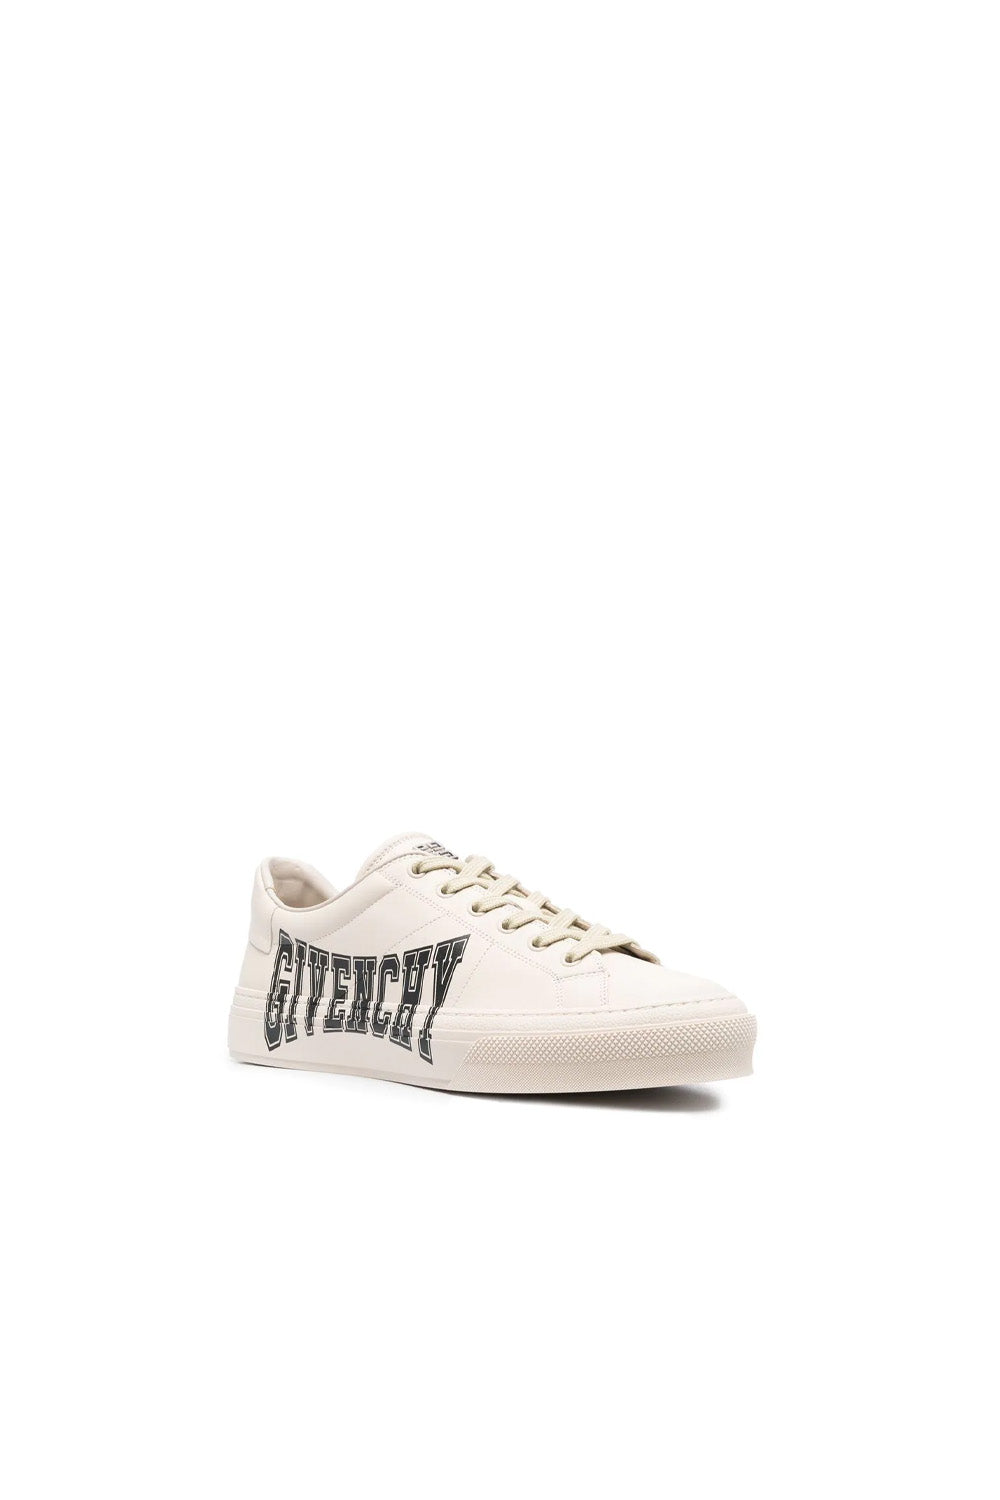 GIVENCHY logo-print lace-up sneakers